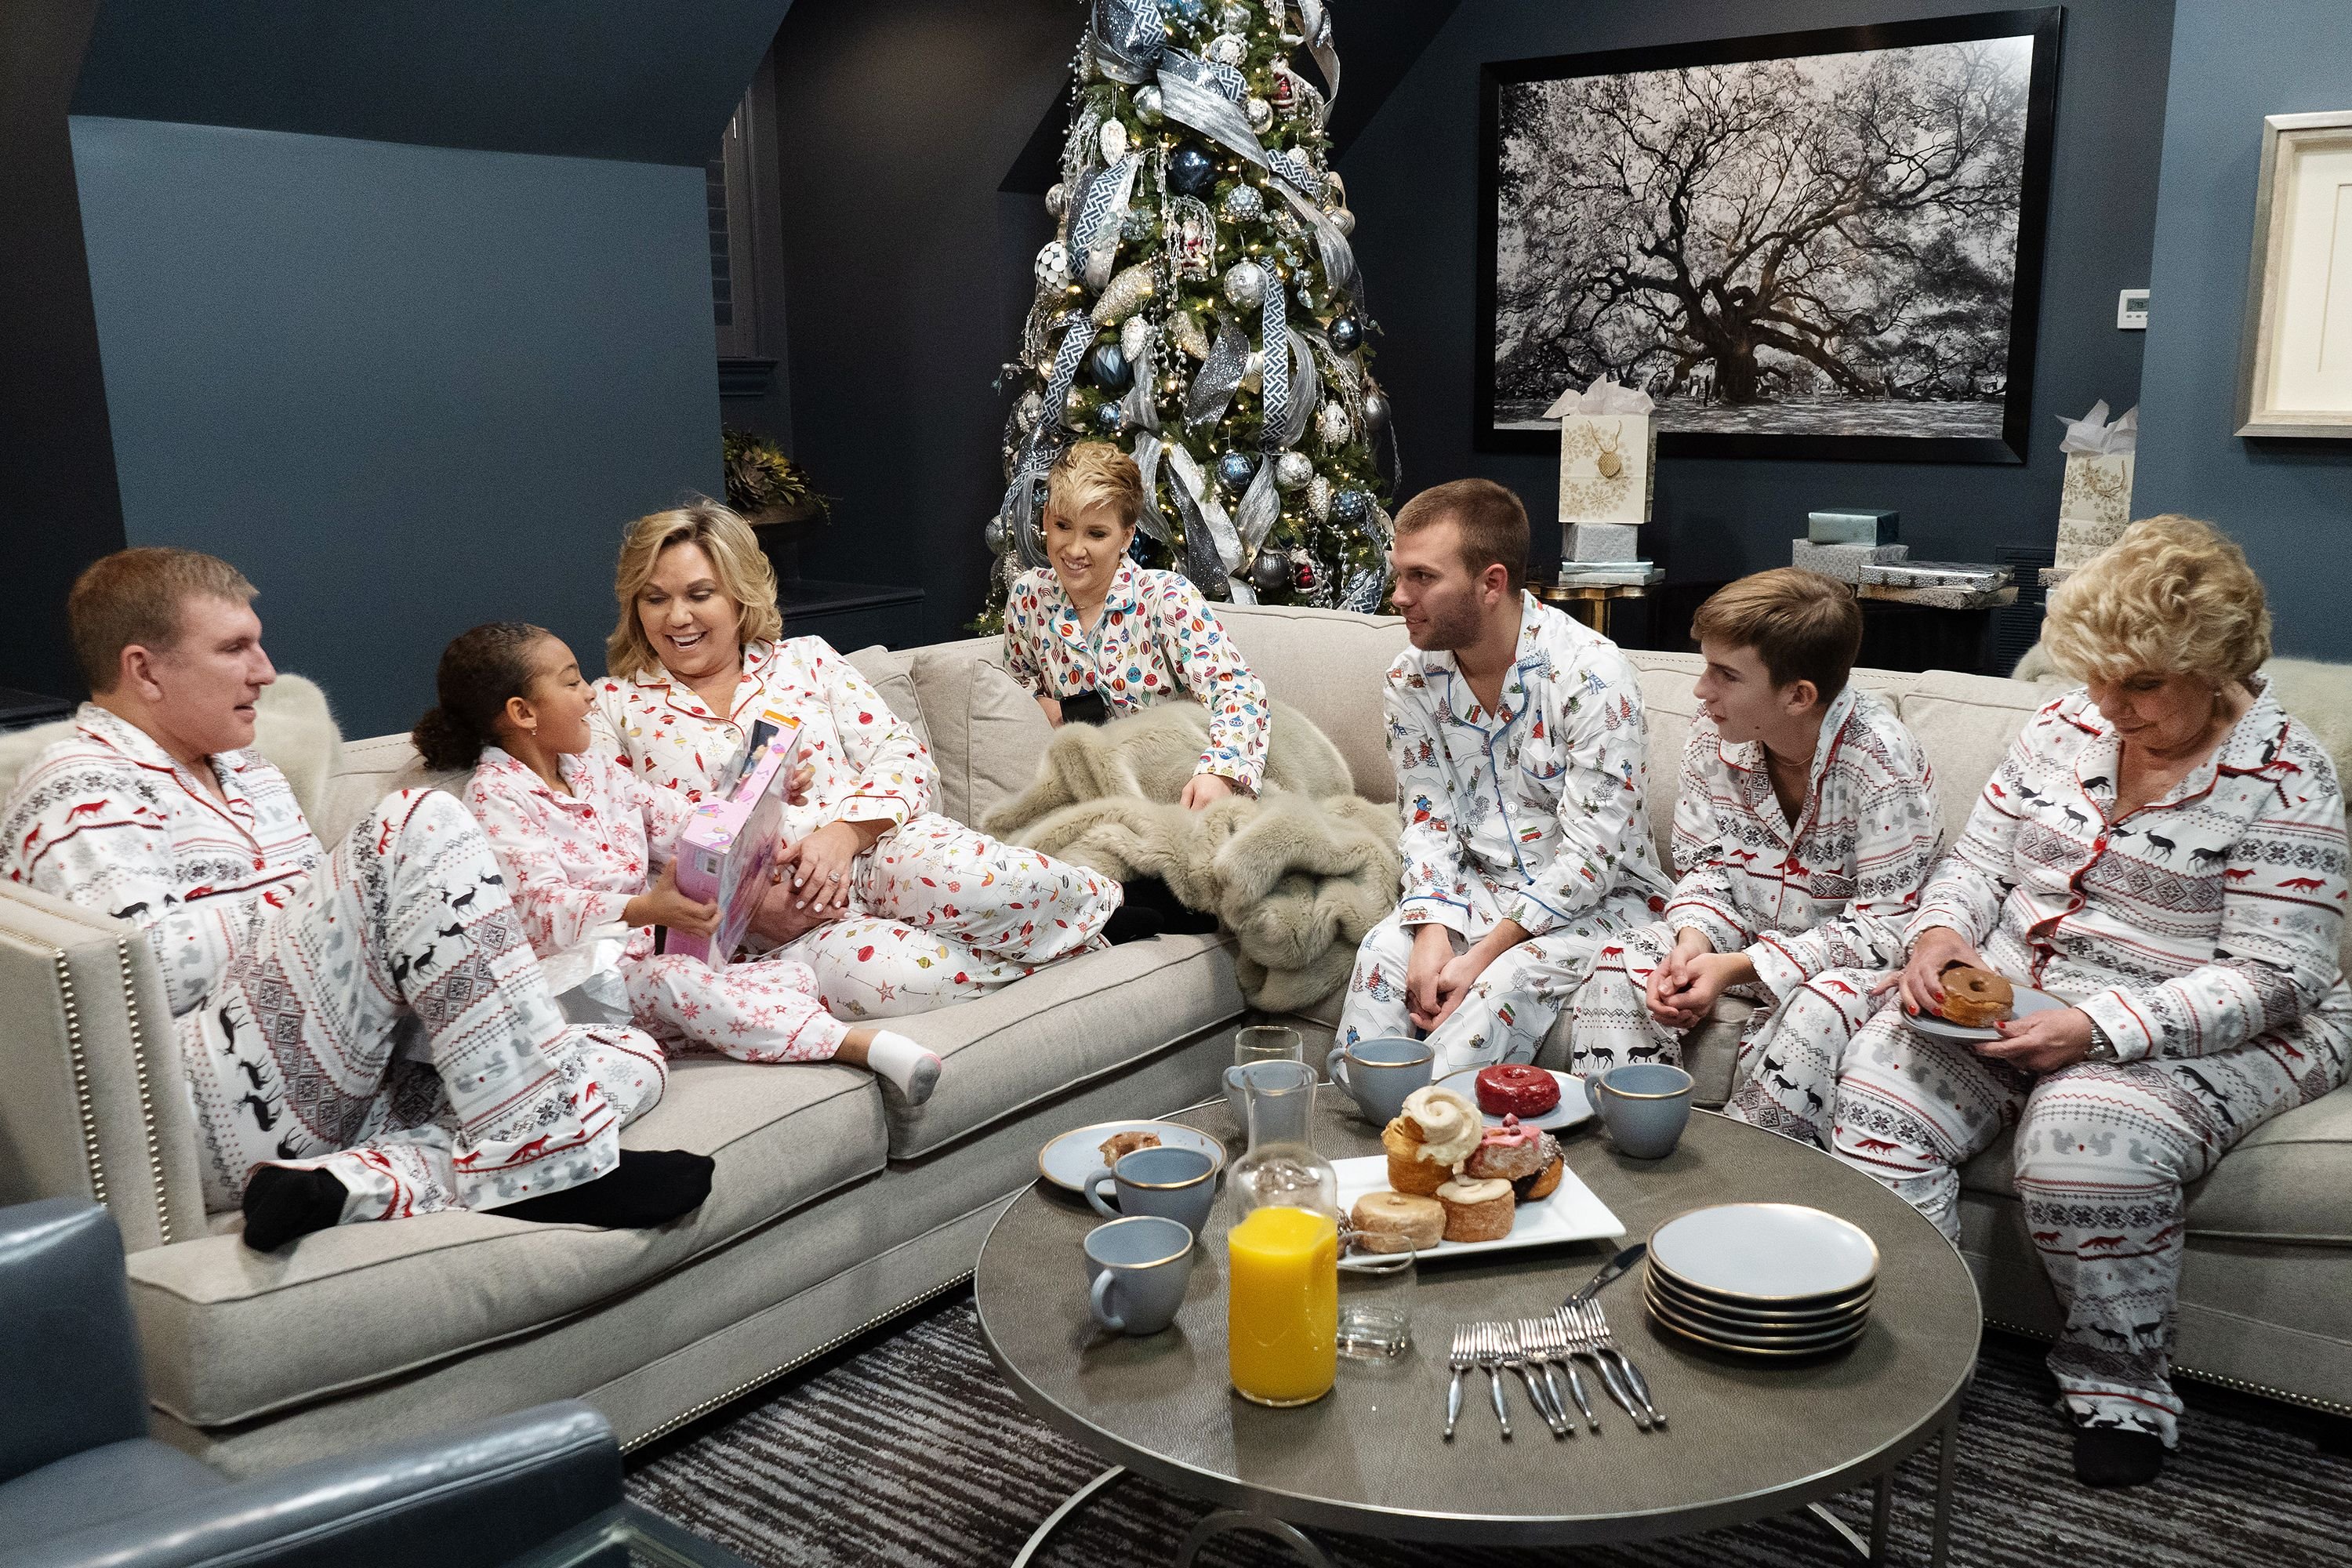 Chrisley Knows Best, "Snitchy Bitchy" Episode 810 -- Pictured: (l-r) Todd Chrisley, Chloe Chrisley, Julie Chrisley, Savannah Chrisley, Chase Chrisley, Grayson Chrisley, Faye Chrisley. Source | Getty Images